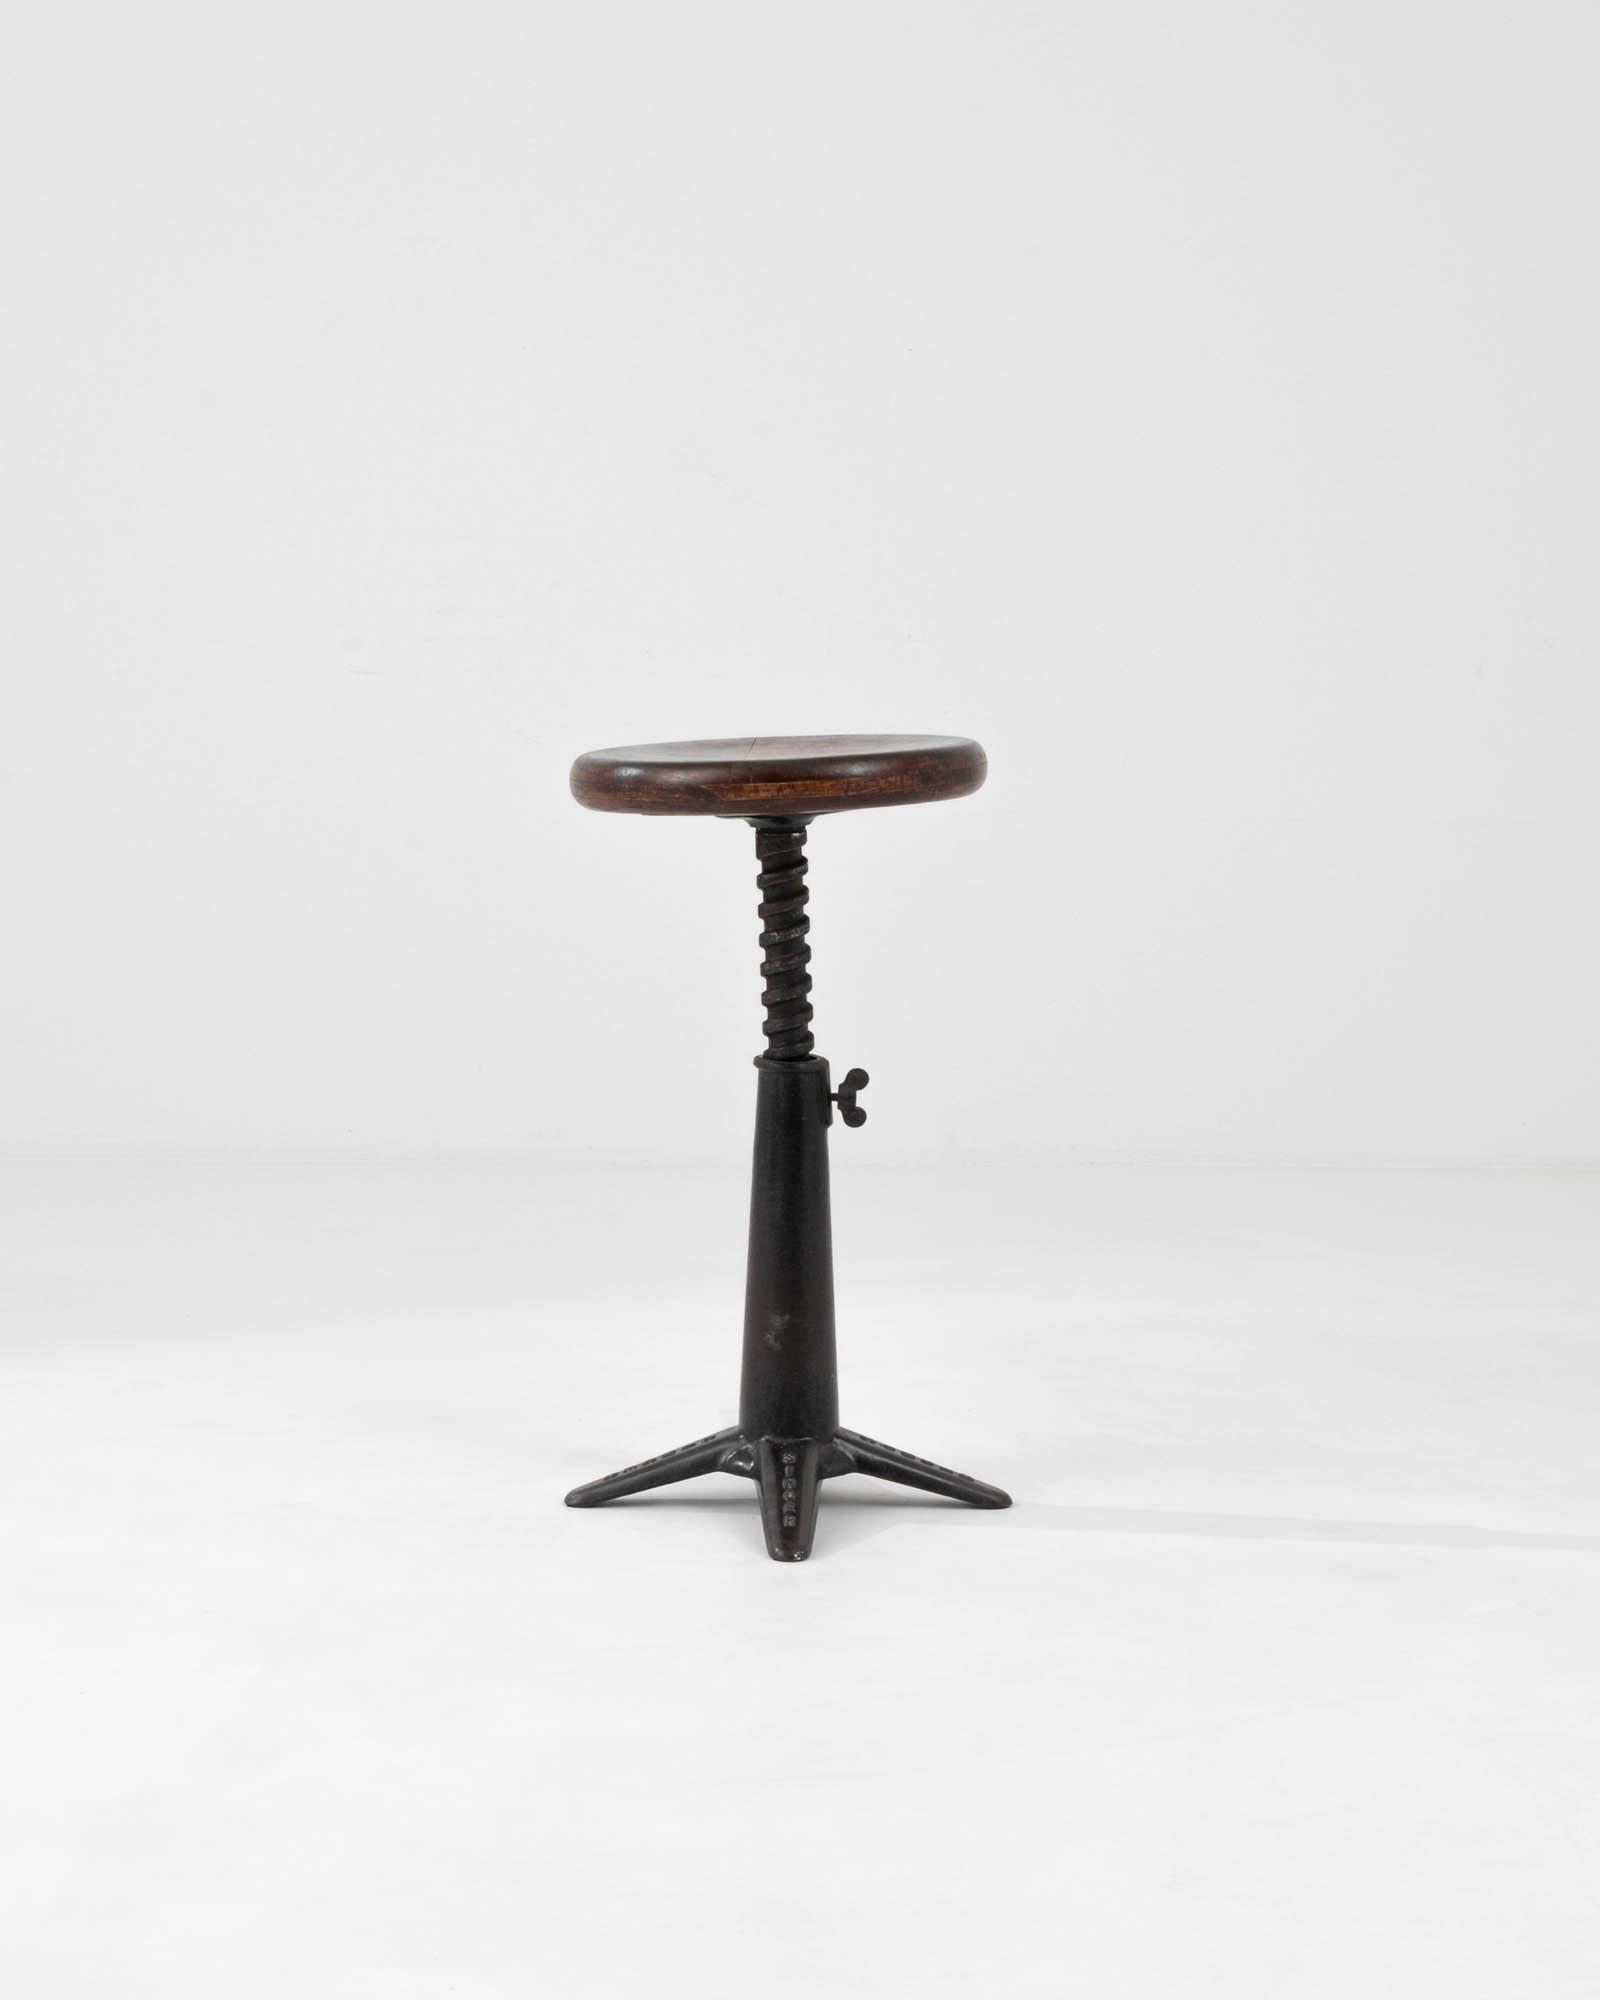 20th Century French Metal Swivel Stool With Wooden Seat 1